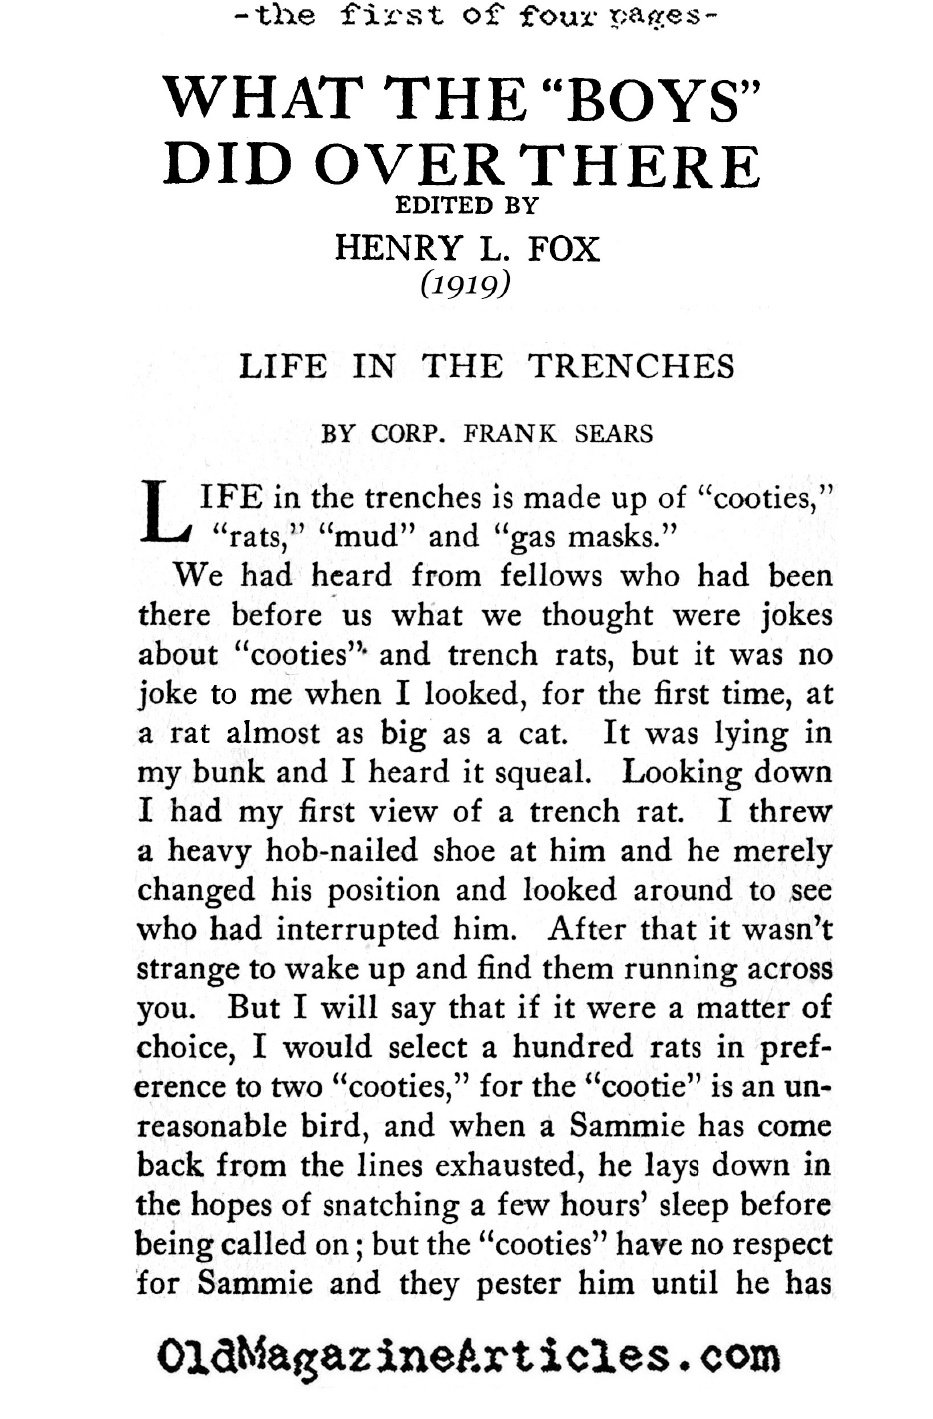 Life in a Trench (What the Boys Did Over There, 1919)